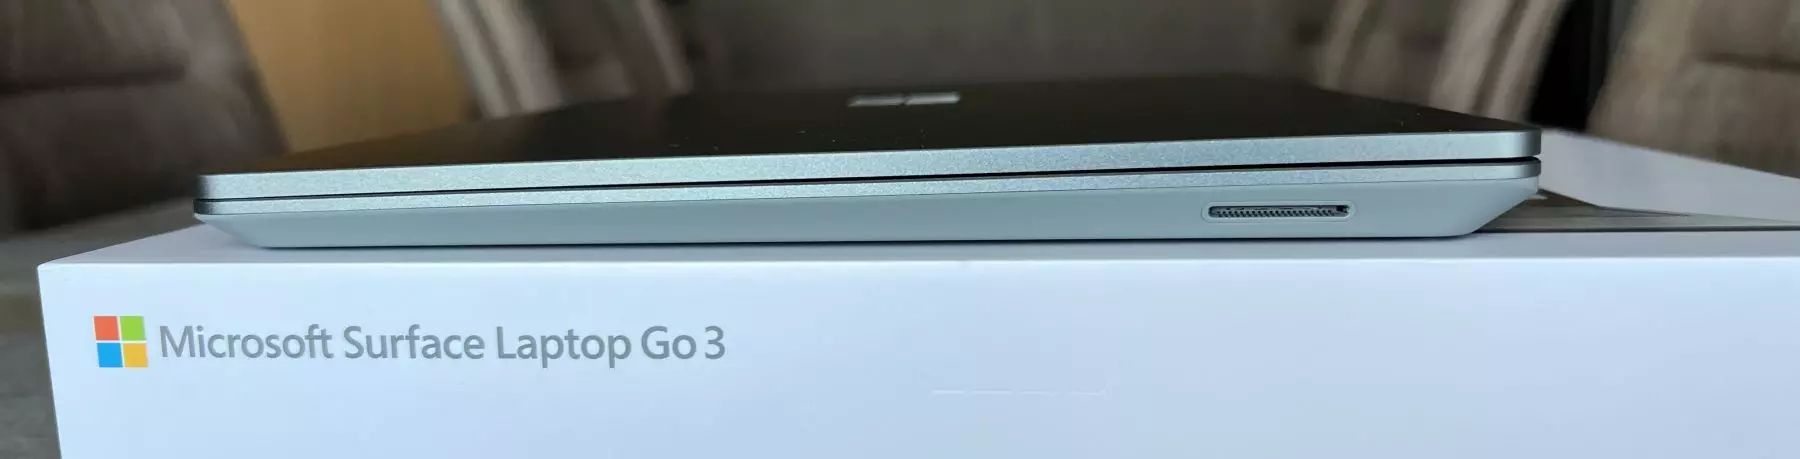 Surface Laptop Go 3 - Side view